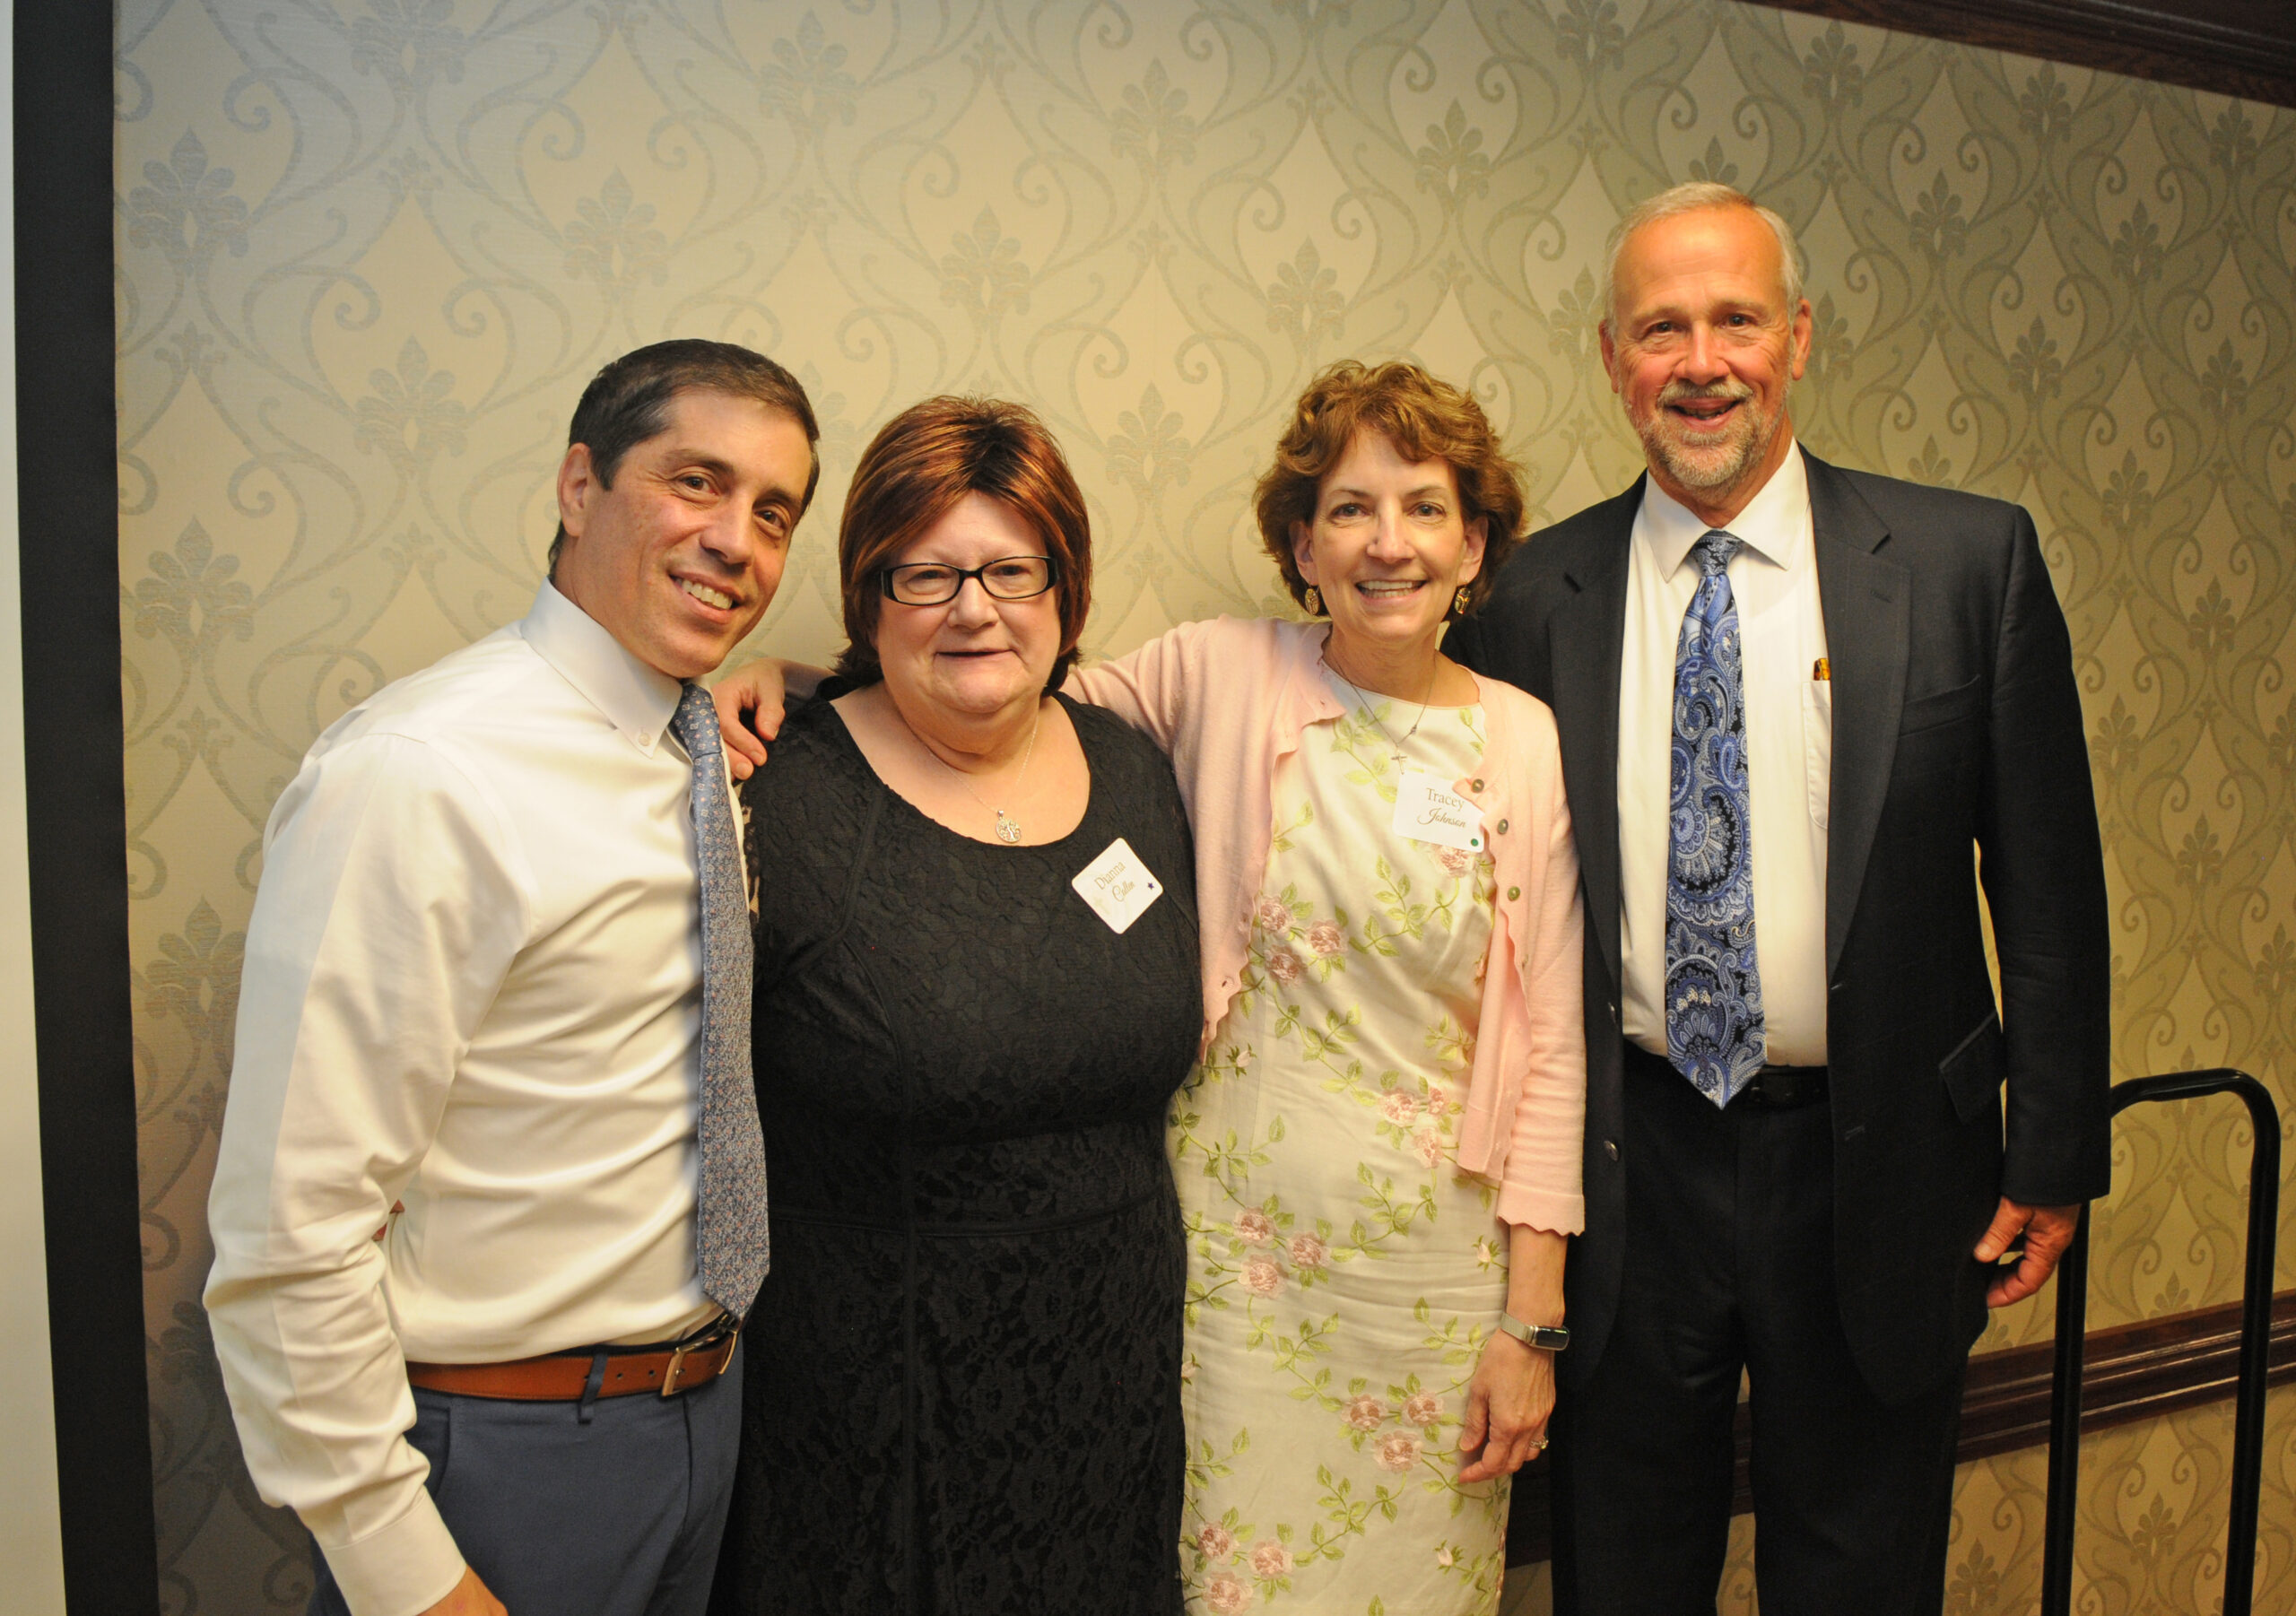 Dian Callen, 2023 Stephen W. Johnson Mission Award recipient flanked by administrator Phil Ricci and Tracey Johnson, wife of Stephen W. Johnson and Chairman of the Concordia Board James Limbaugh